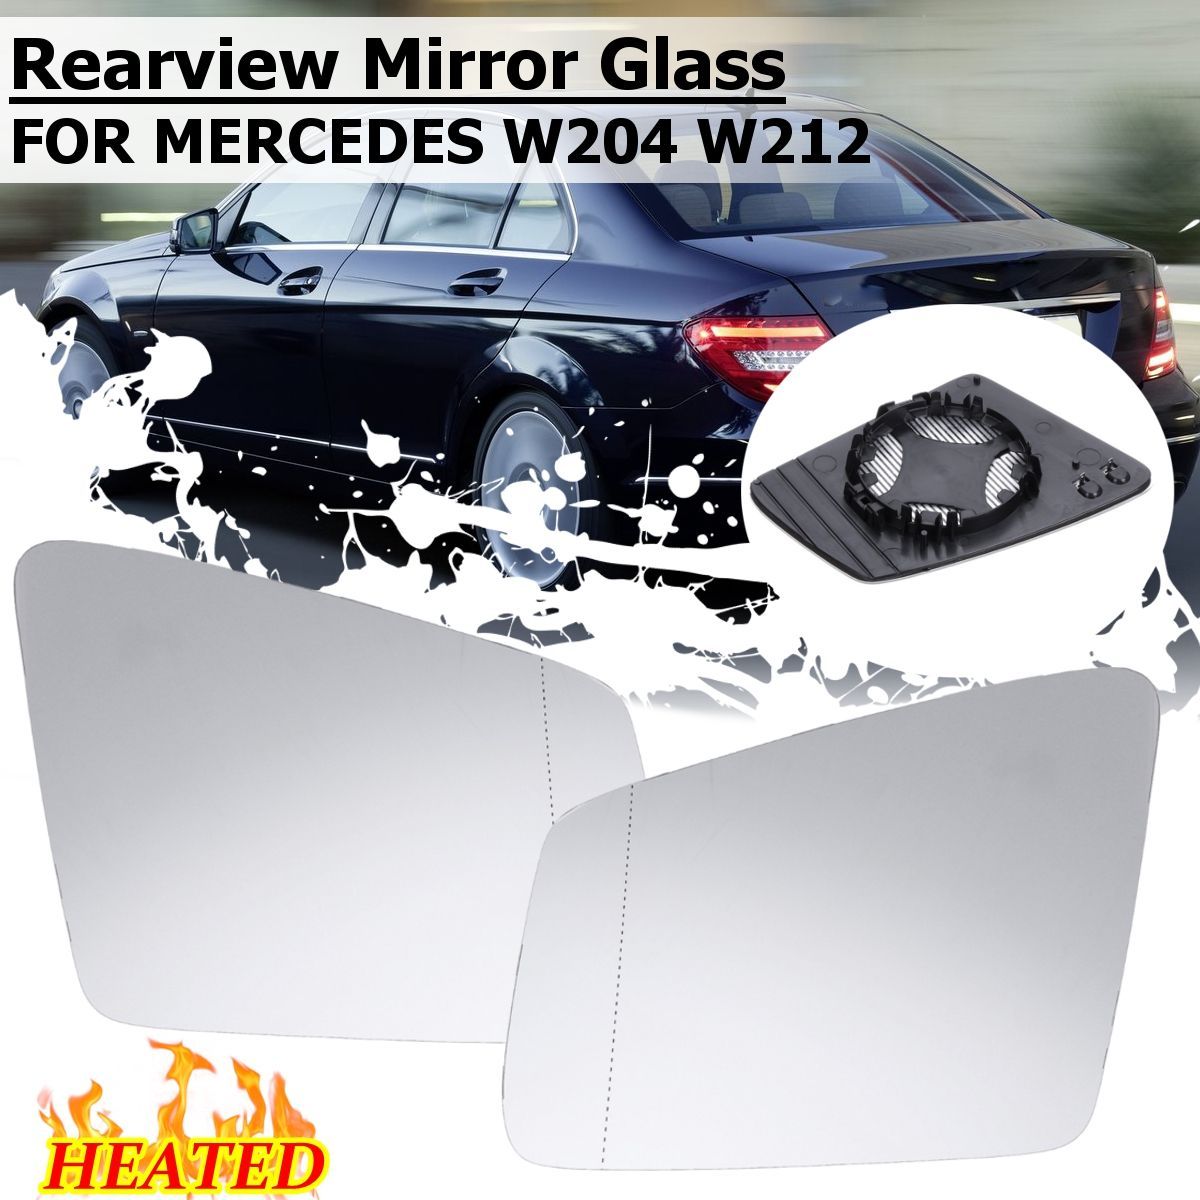 Car-LeftRight-Antifog-Heated-Rearview-Mirror-Glass-For-Mercedes-C-Class-E-Class-W204-W212-1568929